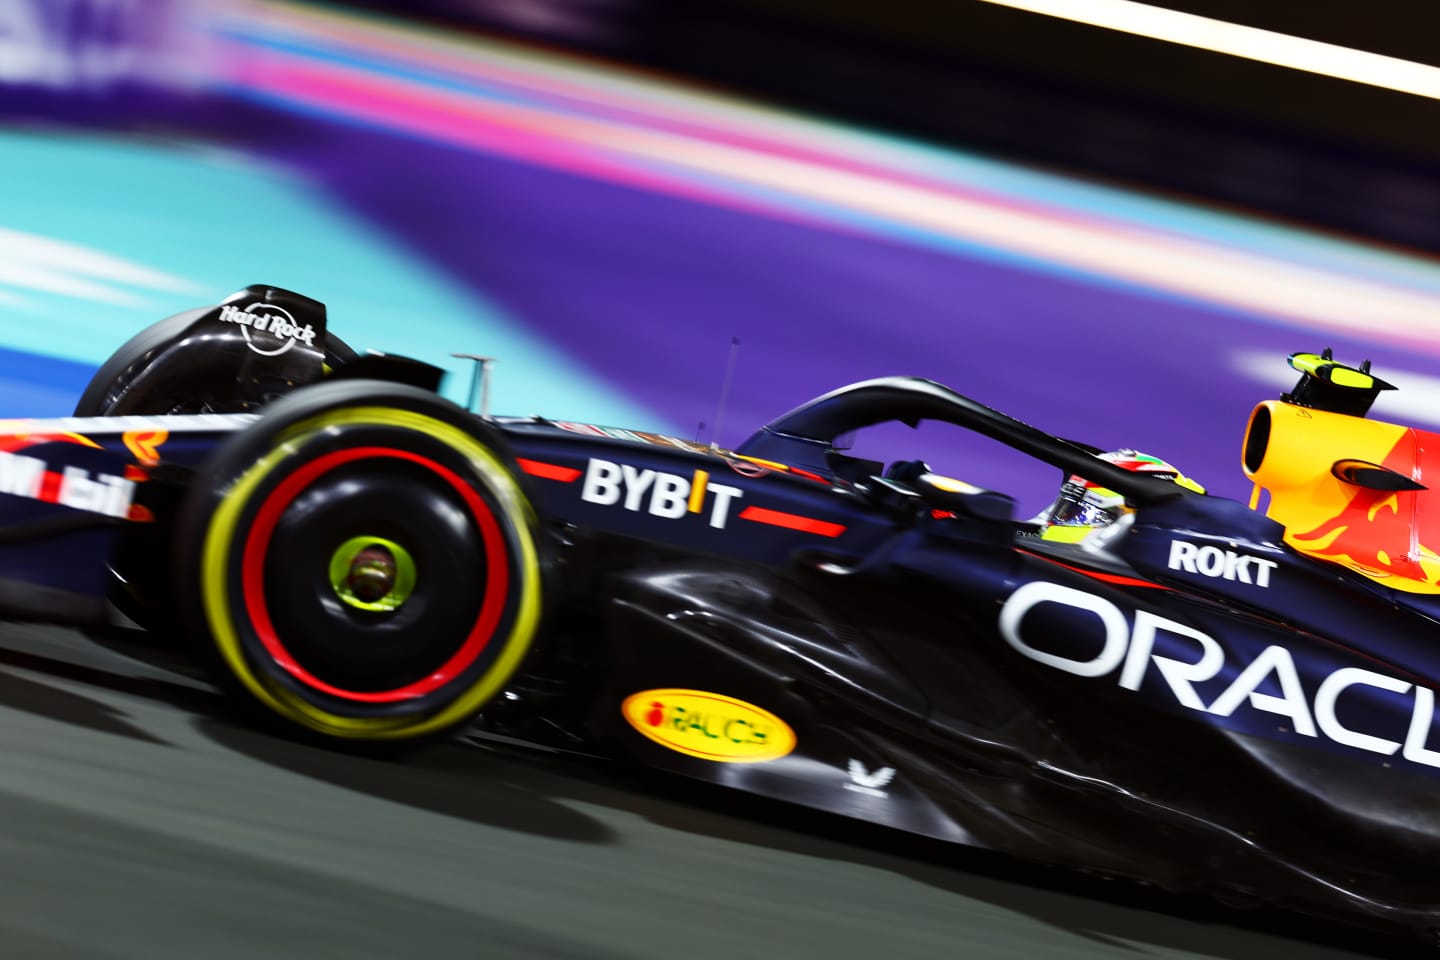 JEDDAH, SAUDI ARABIA - MARCH 17: Sergio Perez of Mexico driving the (11) Oracle Red Bull Racing RB19 on track during practice ahead of the F1 Grand Prix of Saudi Arabia at Jeddah Corniche Circuit on March 17, 2023 in Jeddah, Saudi Arabia. (Photo by Dan Istitene - Formula 1/Formula 1 via Getty Images)